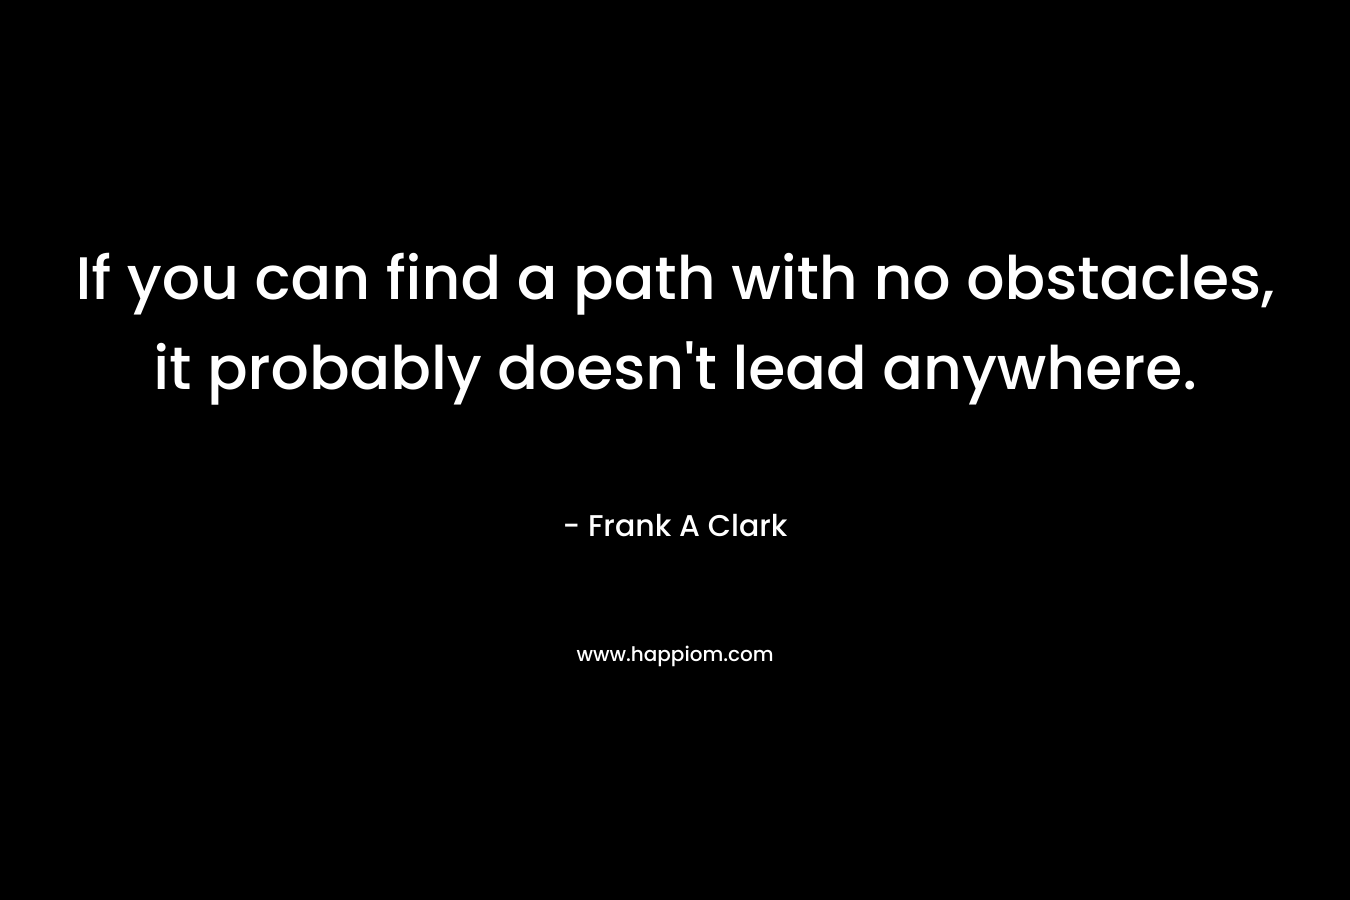 If you can find a path with no obstacles, it probably doesn’t lead anywhere. – Frank A Clark